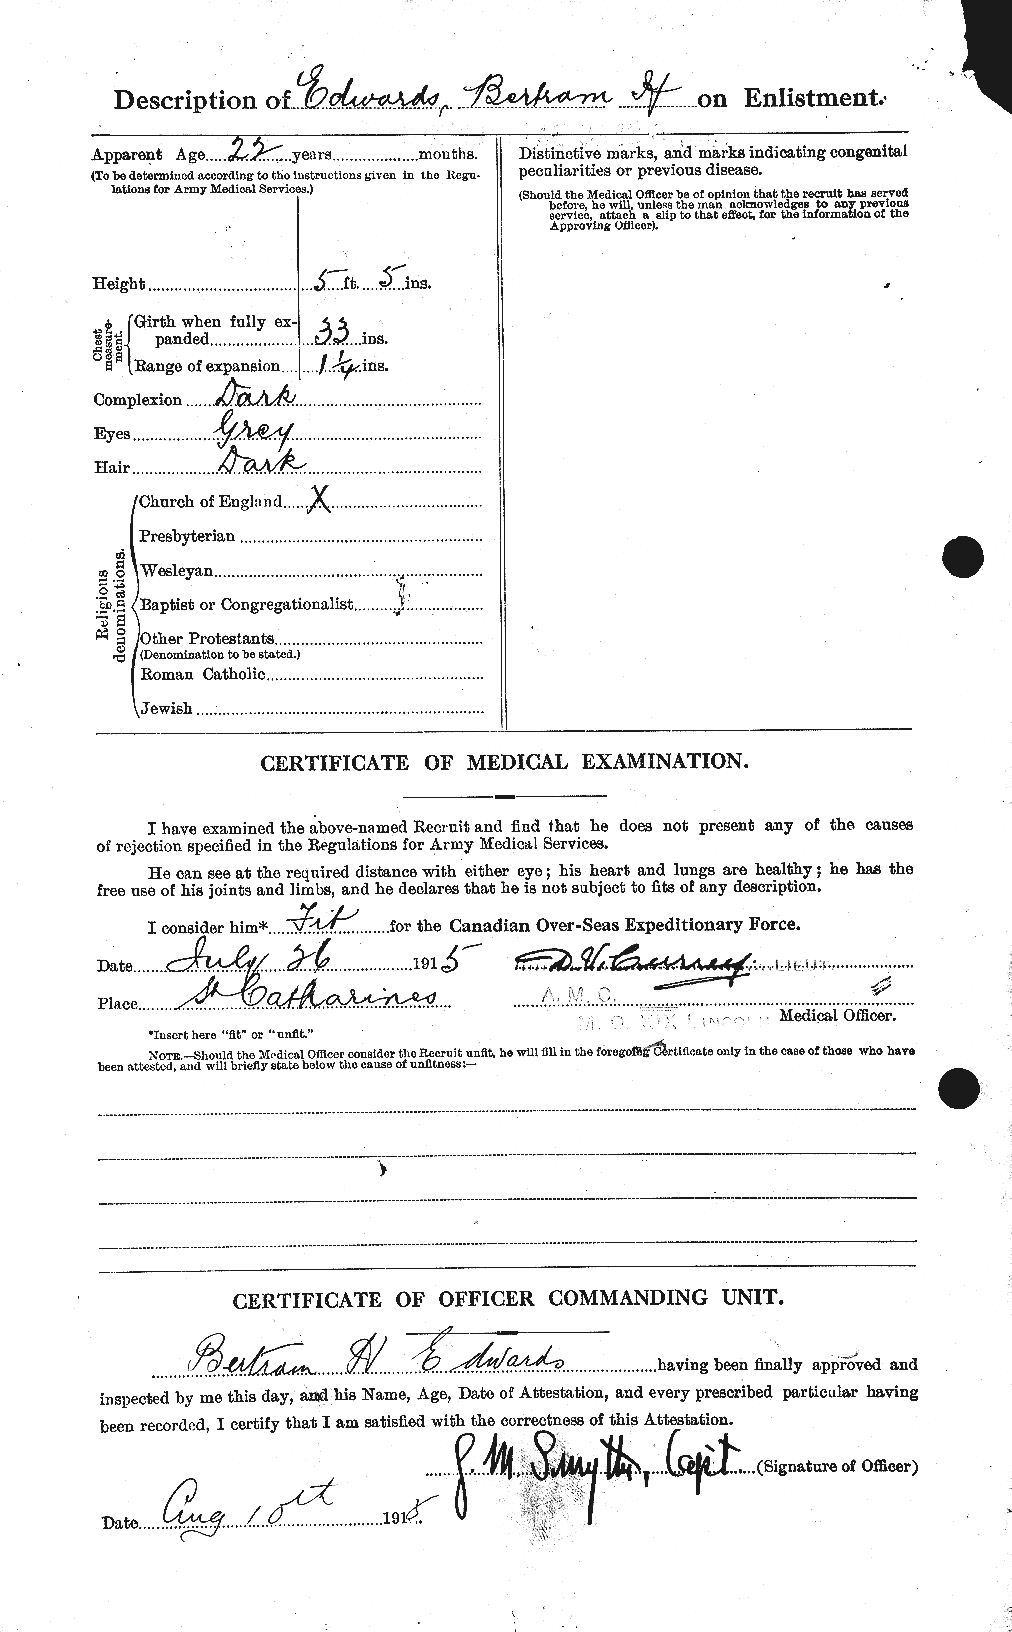 Personnel Records of the First World War - CEF 313150b